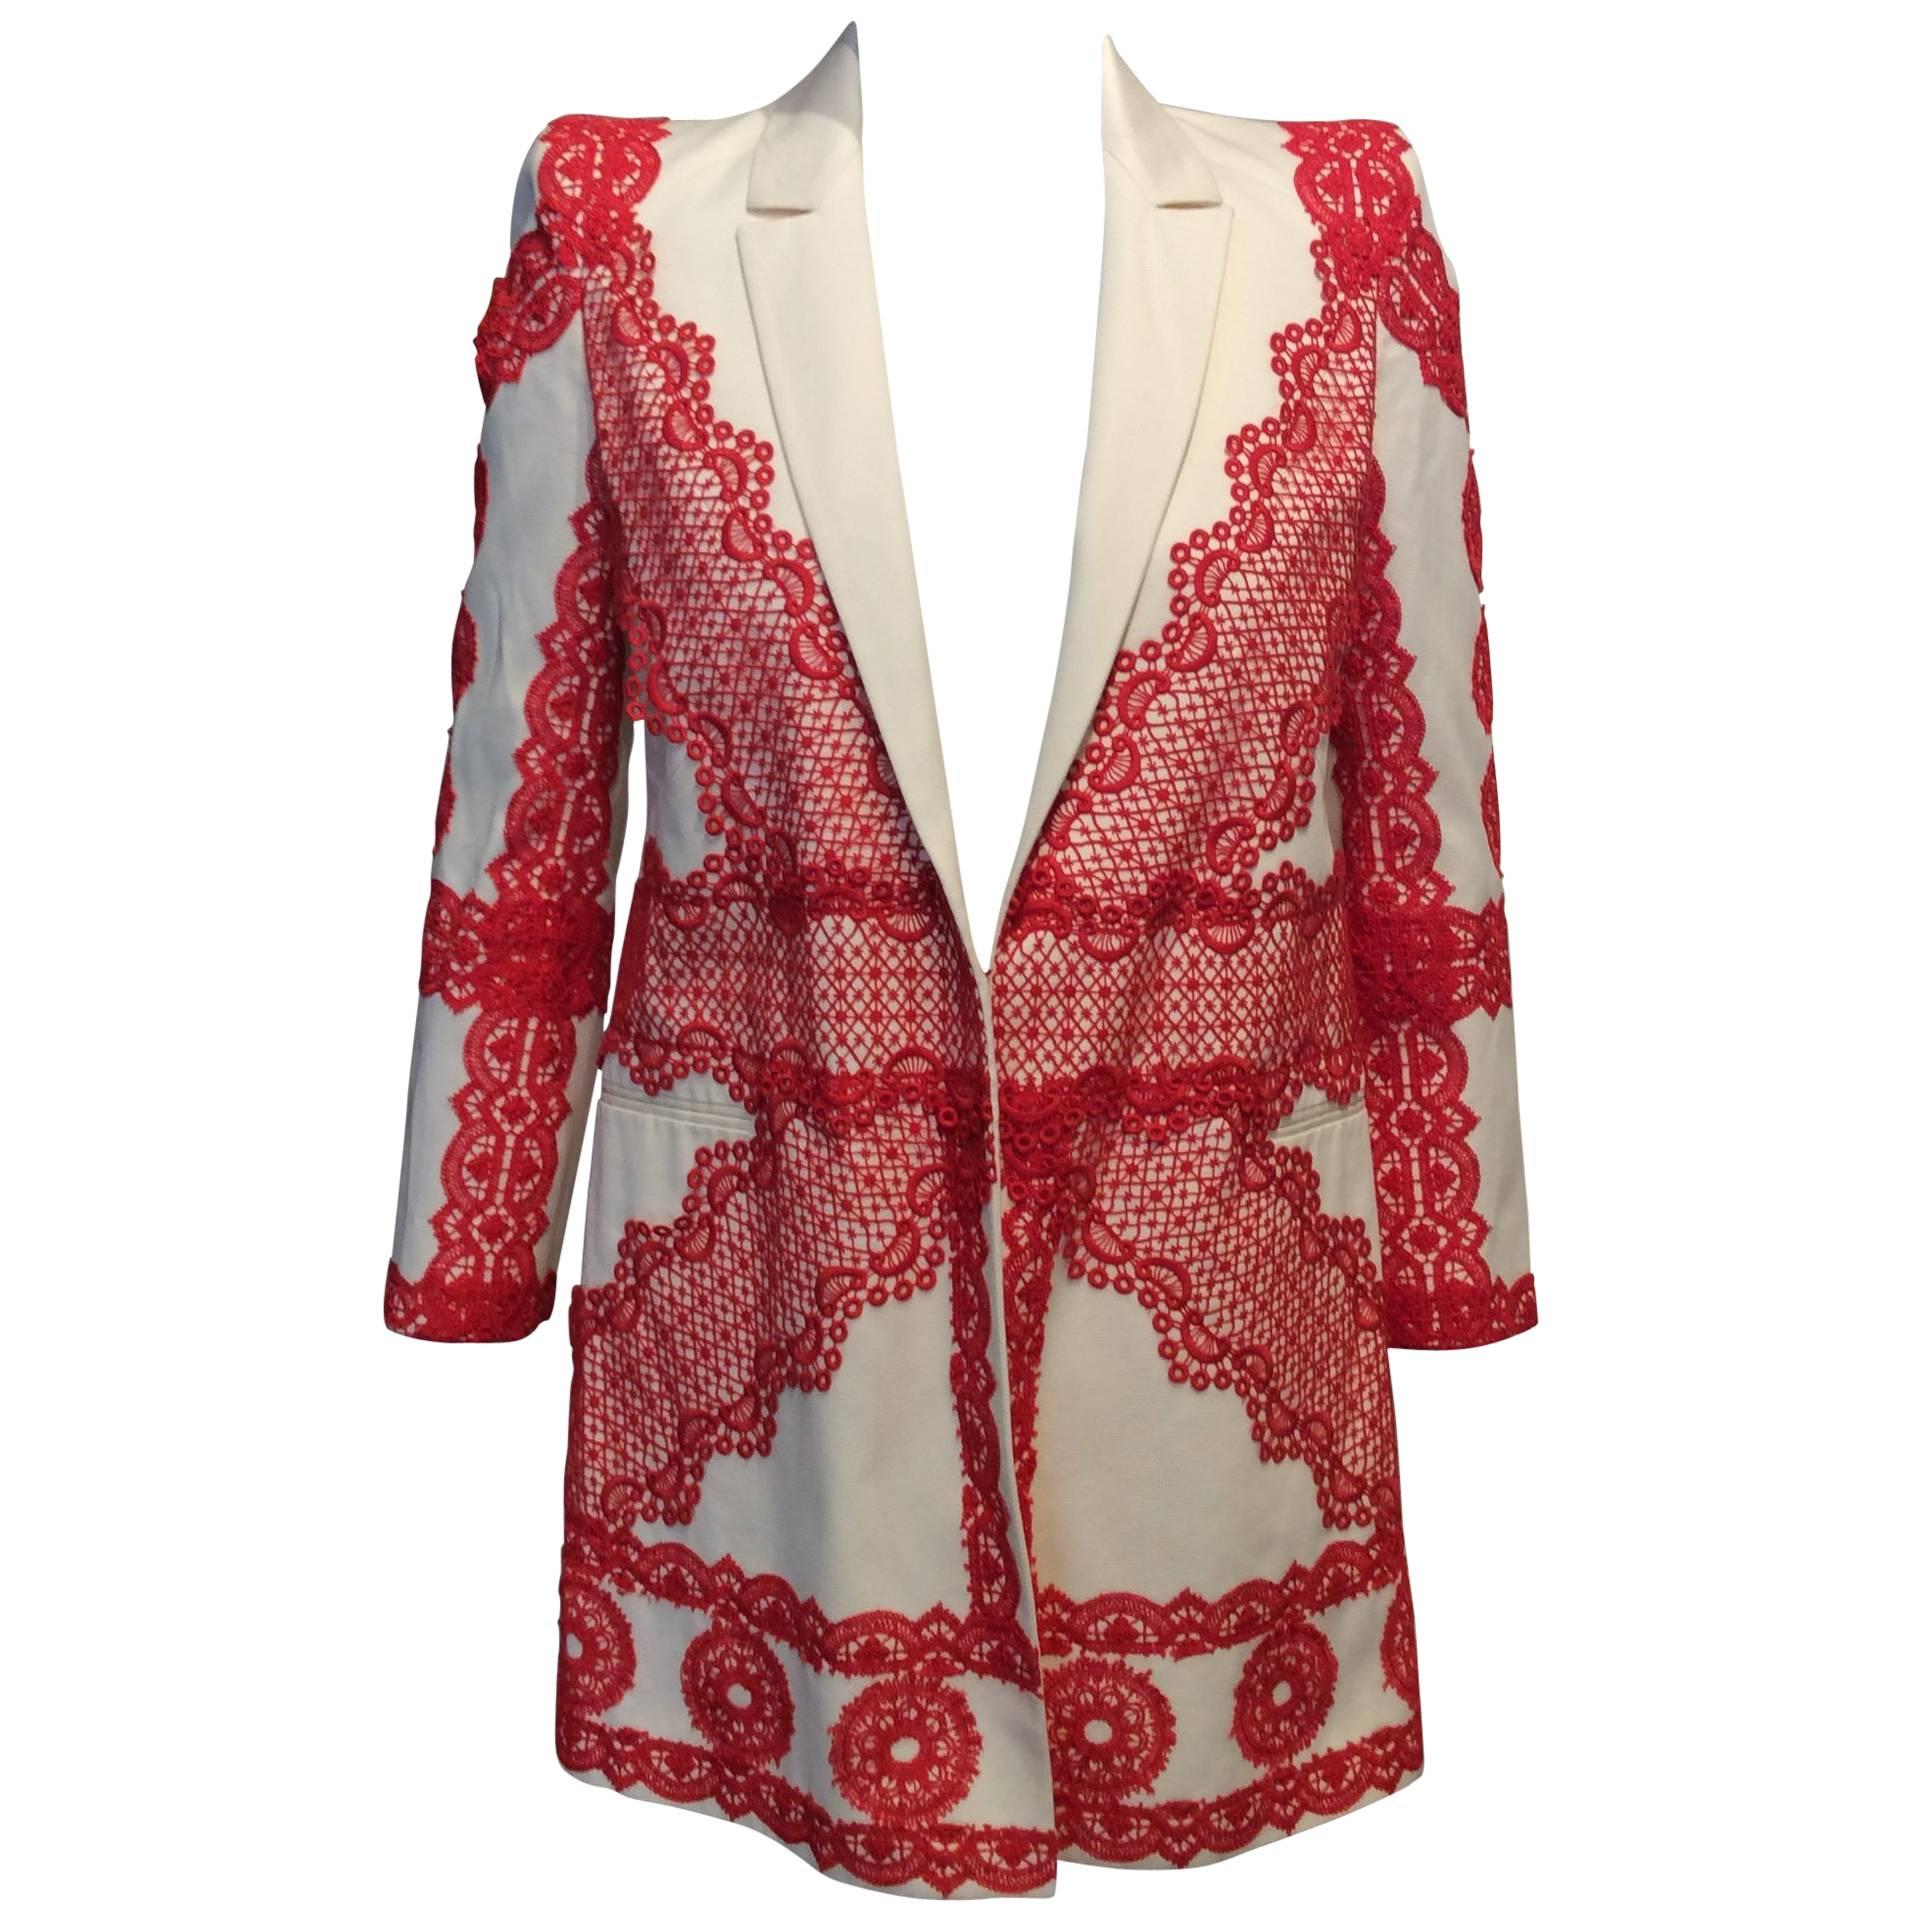 Givenchy Ivory Cotton Jacket with Deep Coral Lace Stitching Sz Fr34/Us2 For Sale